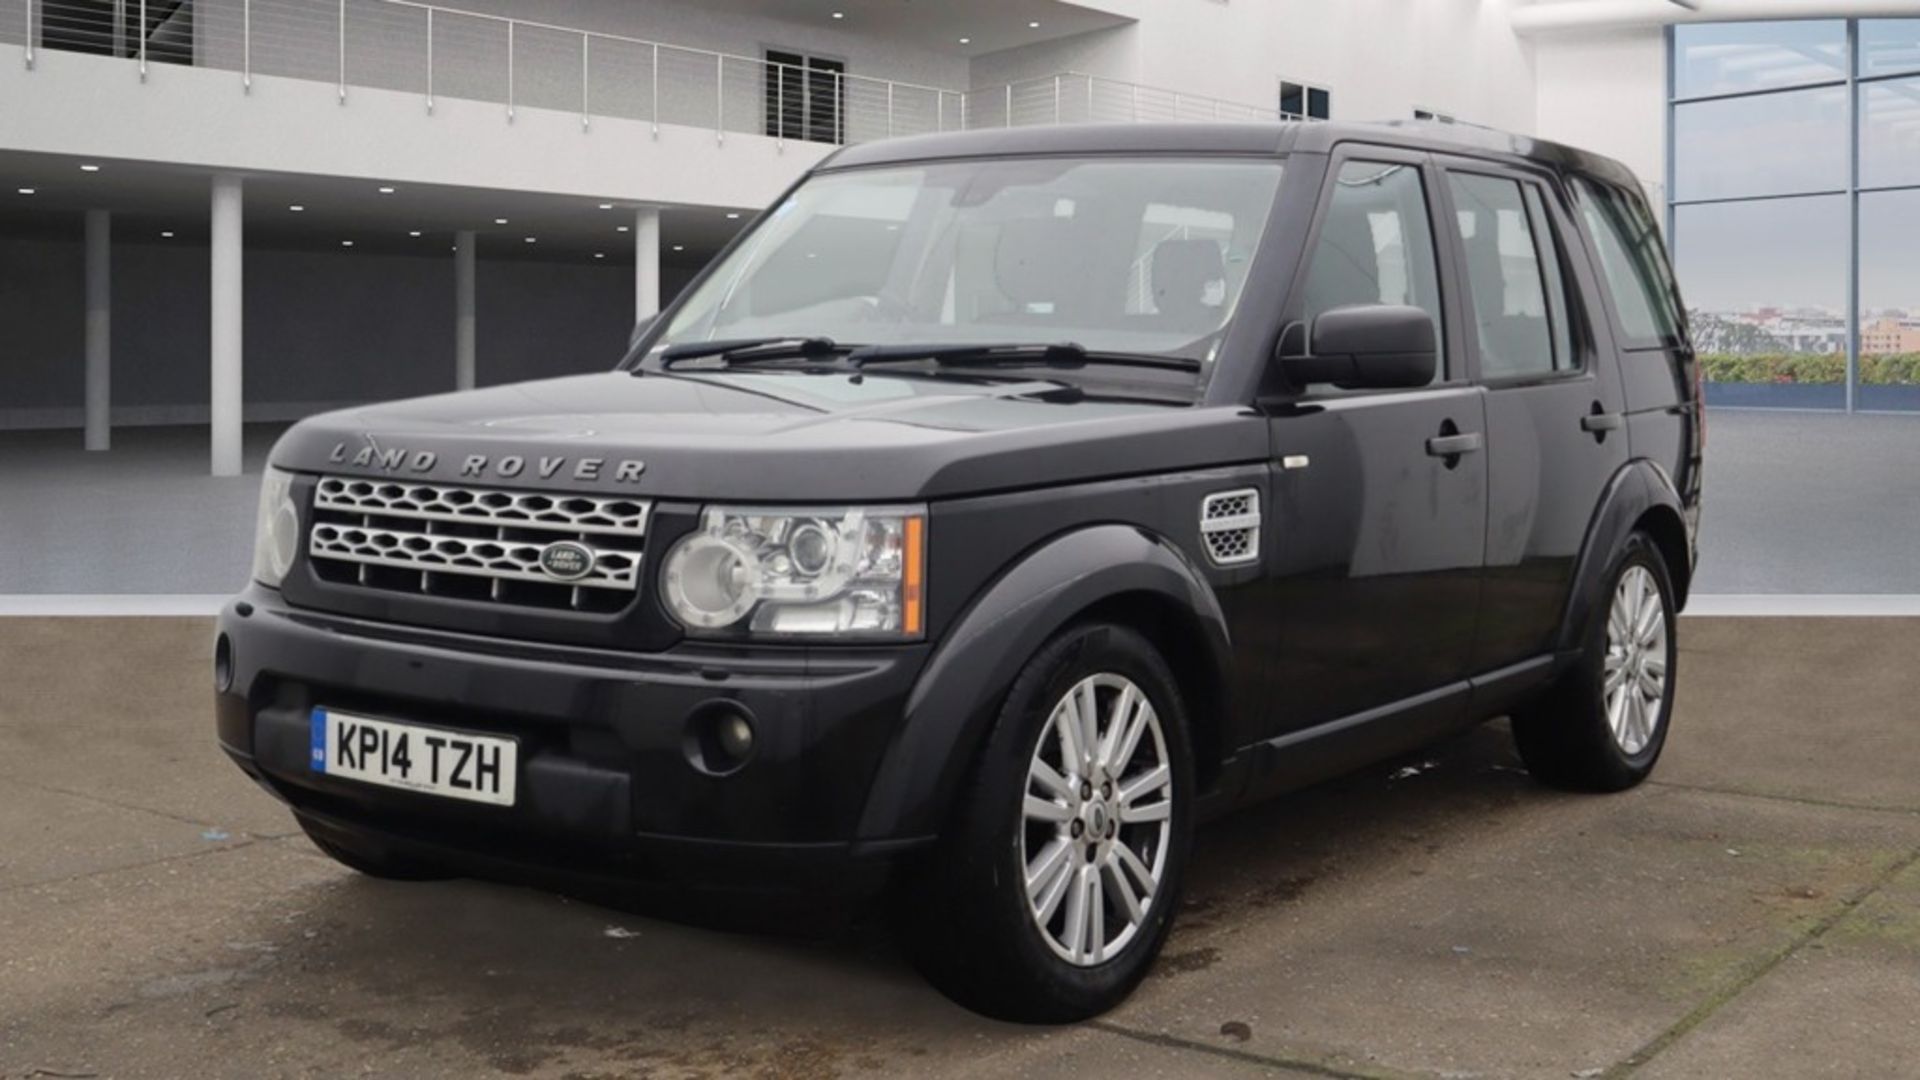 ** ON SALE **Land Rover Discovery 4 255 GS 3.0 SDV6 2014 '14 Reg' -Alloy Wheels -Parking Sensors - Image 2 of 9